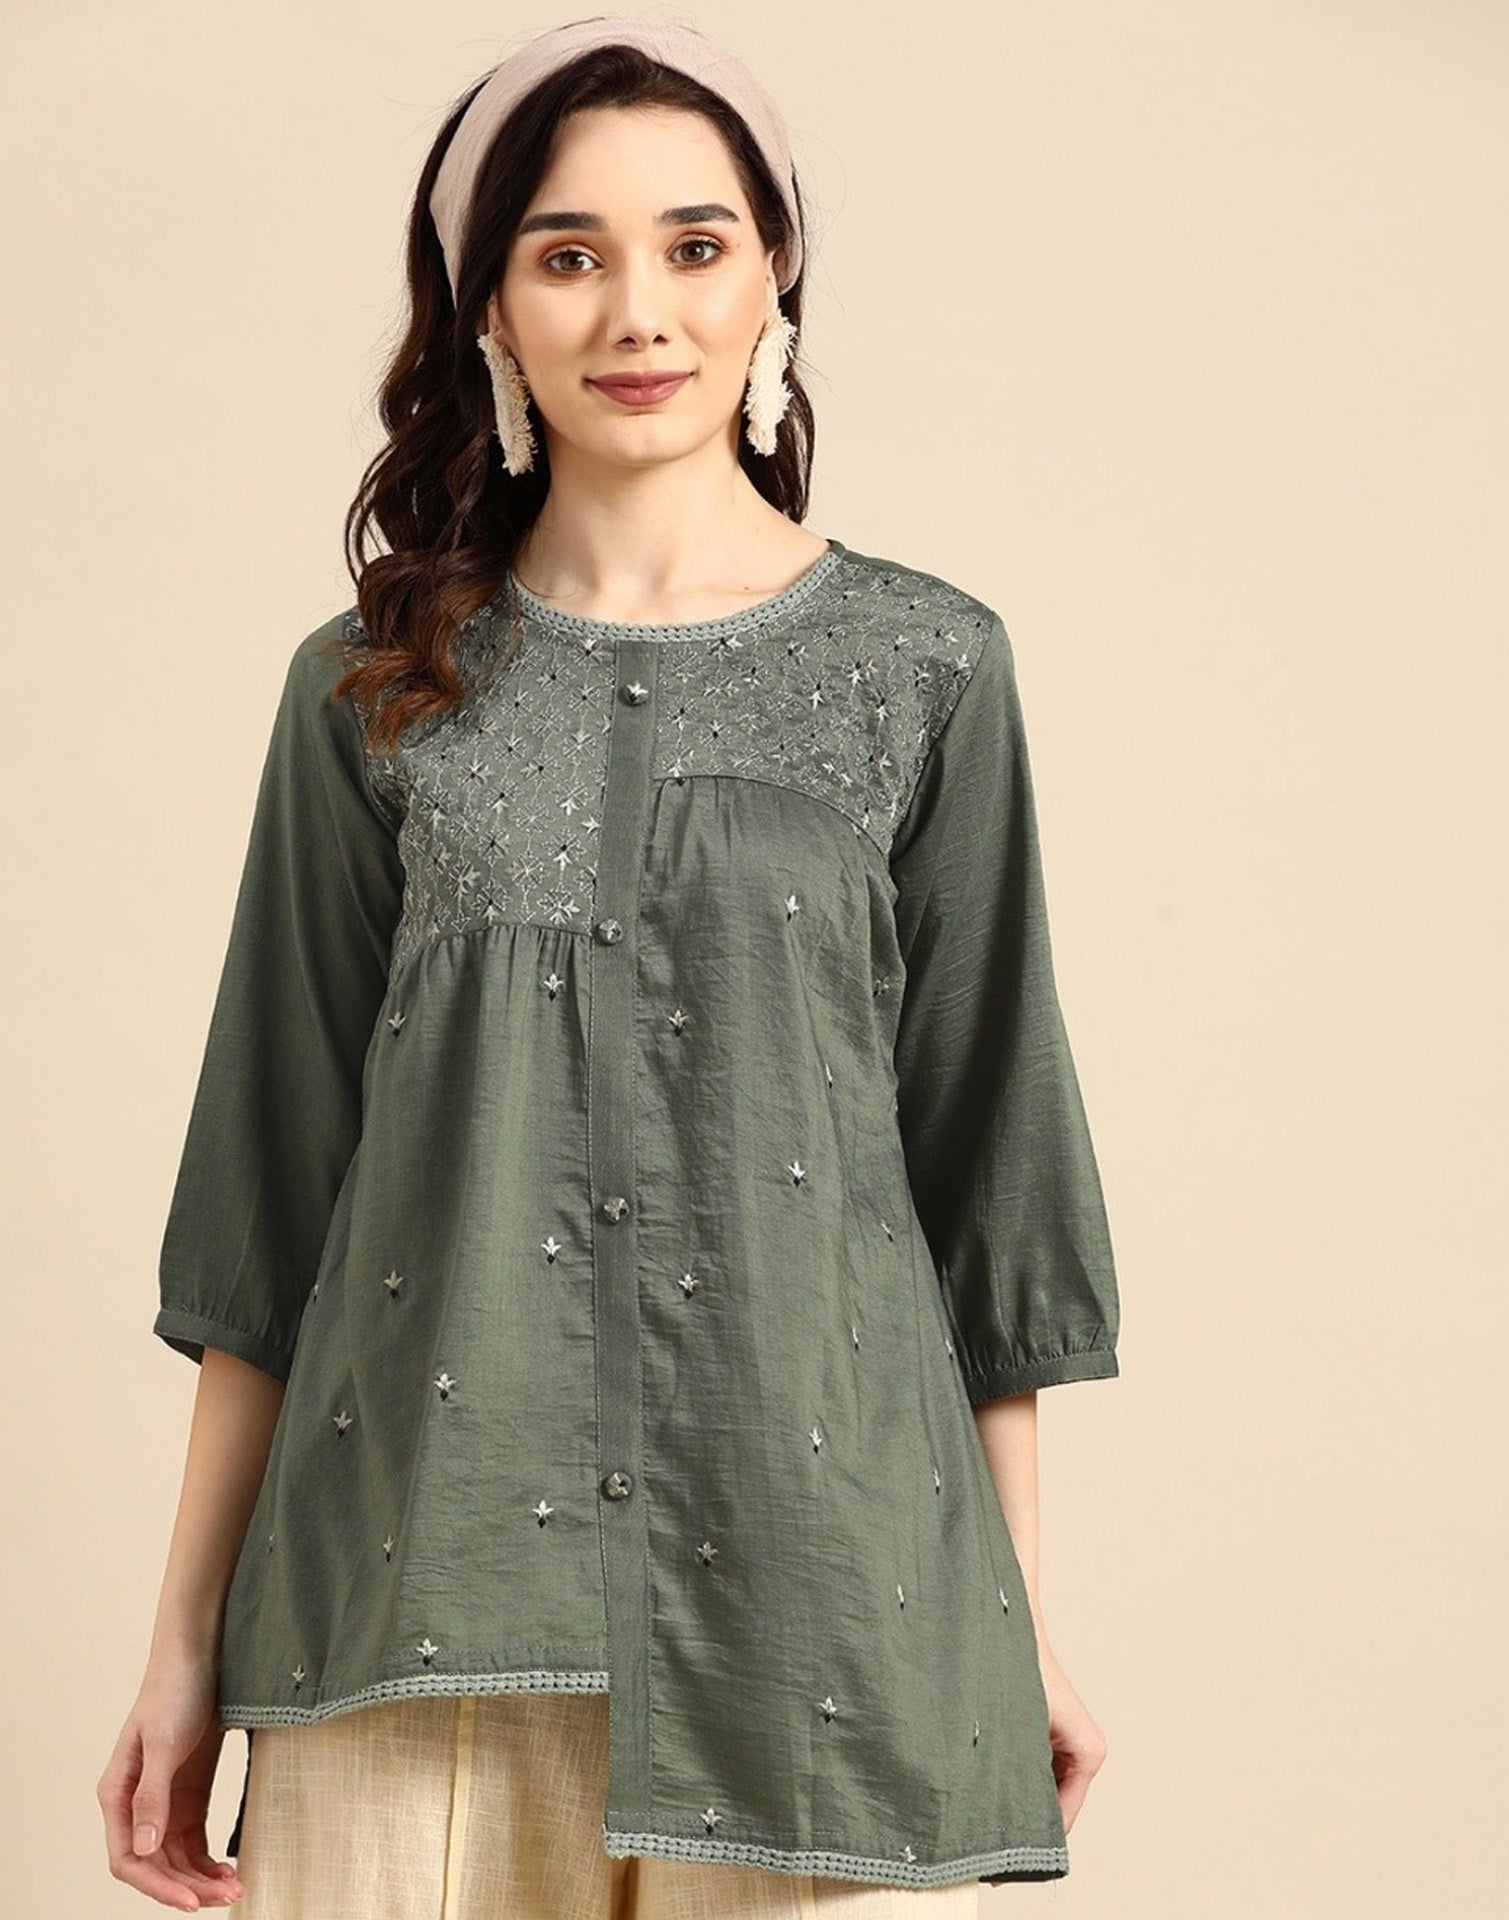 Olive Green Embroidered Short Top | Leemboodi